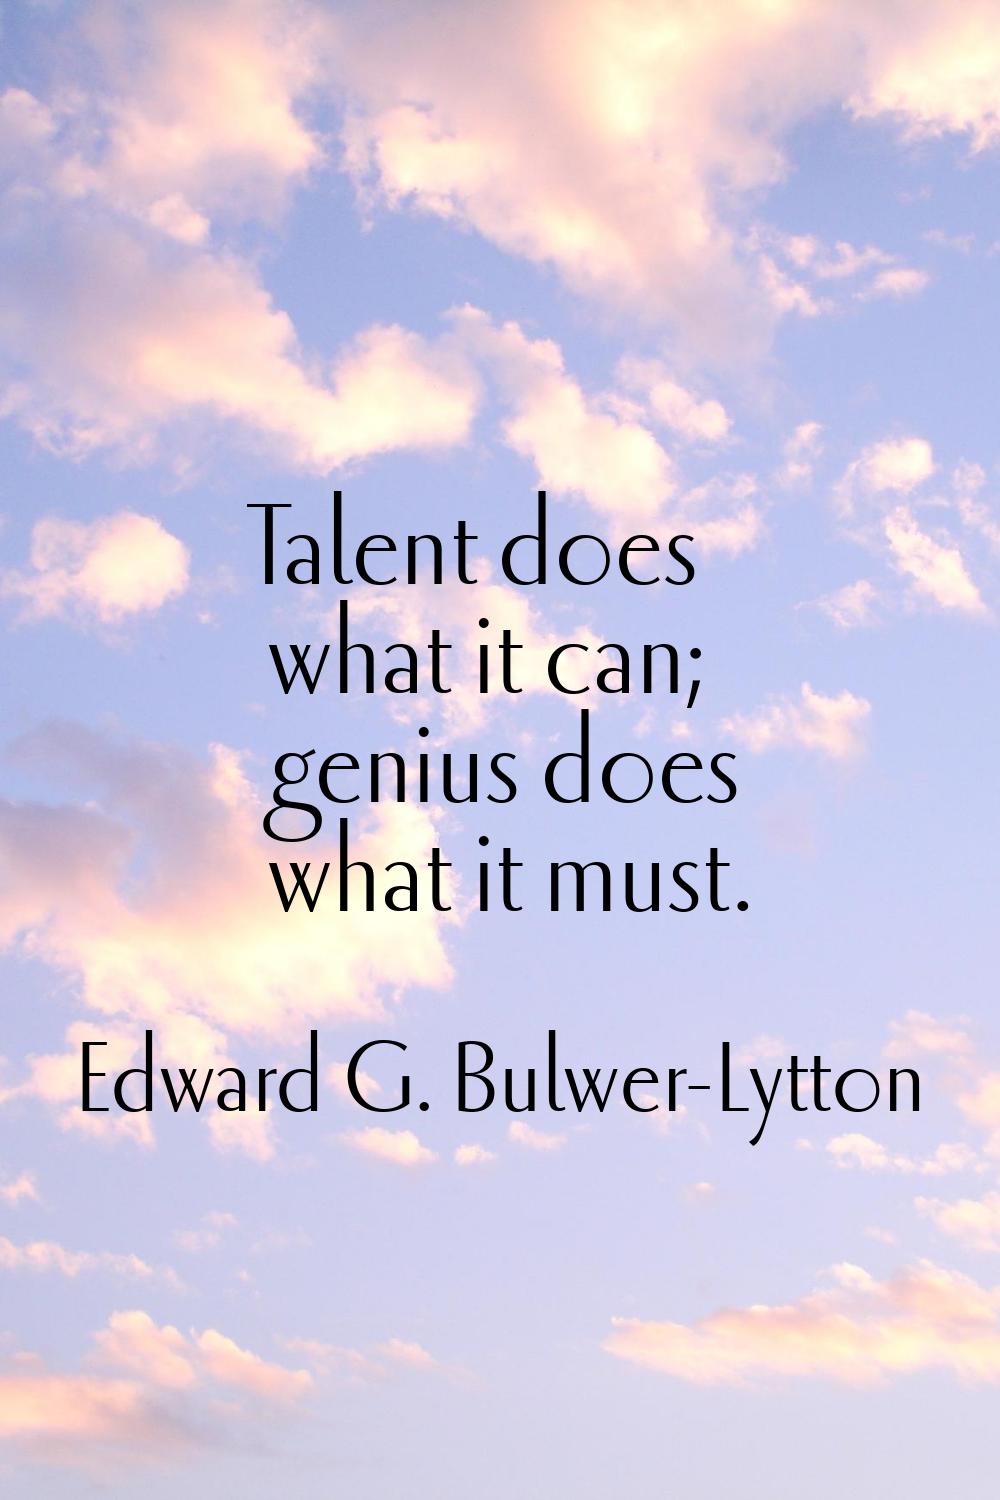 Talent does what it can; genius does what it must.